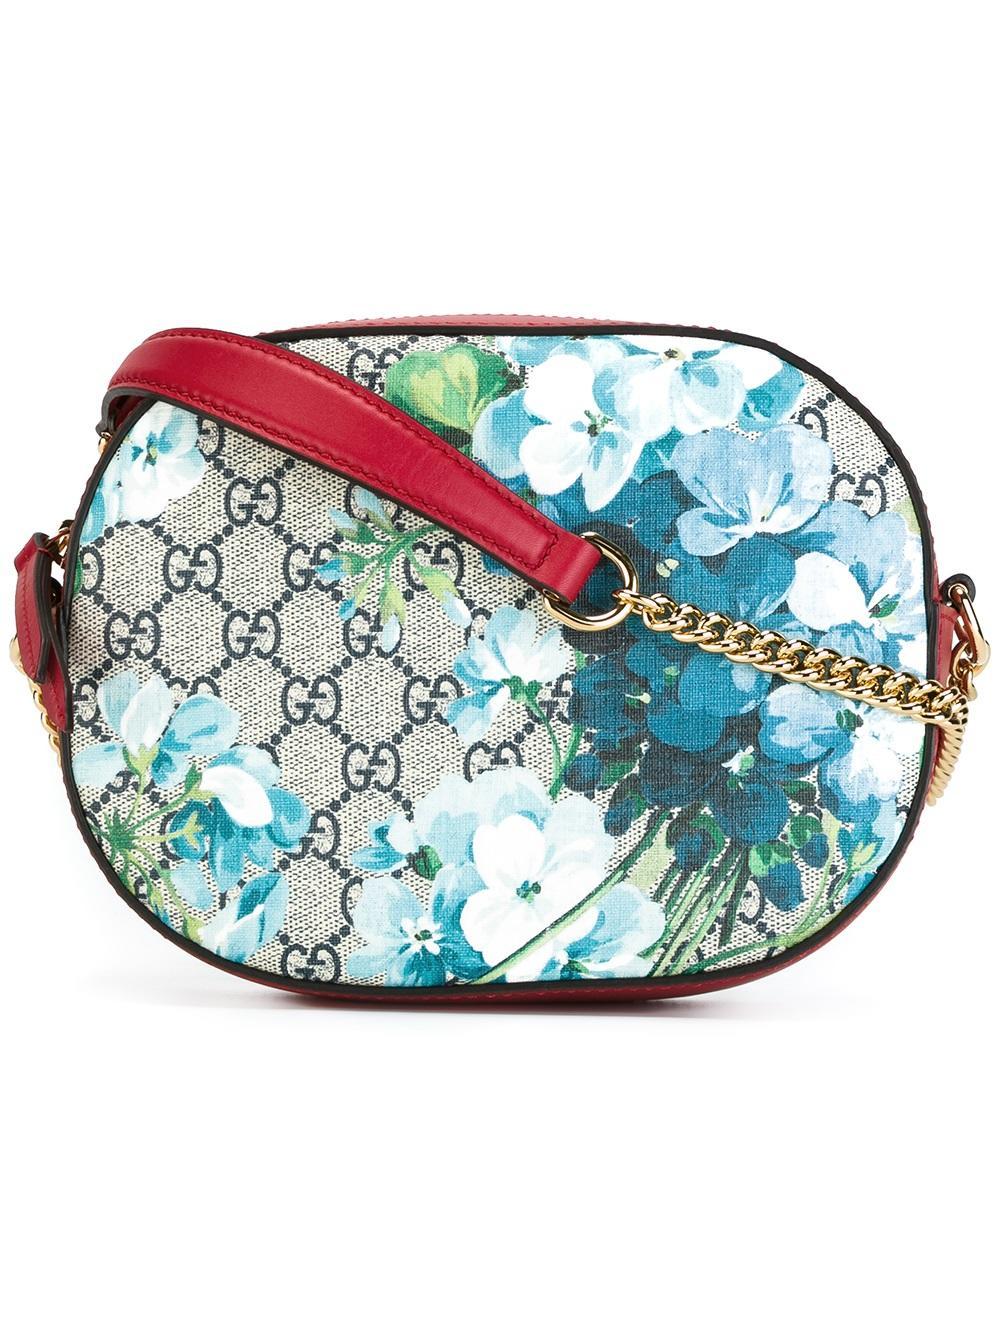 Gucci Floral Print Crossbody Bag in Red | Lyst